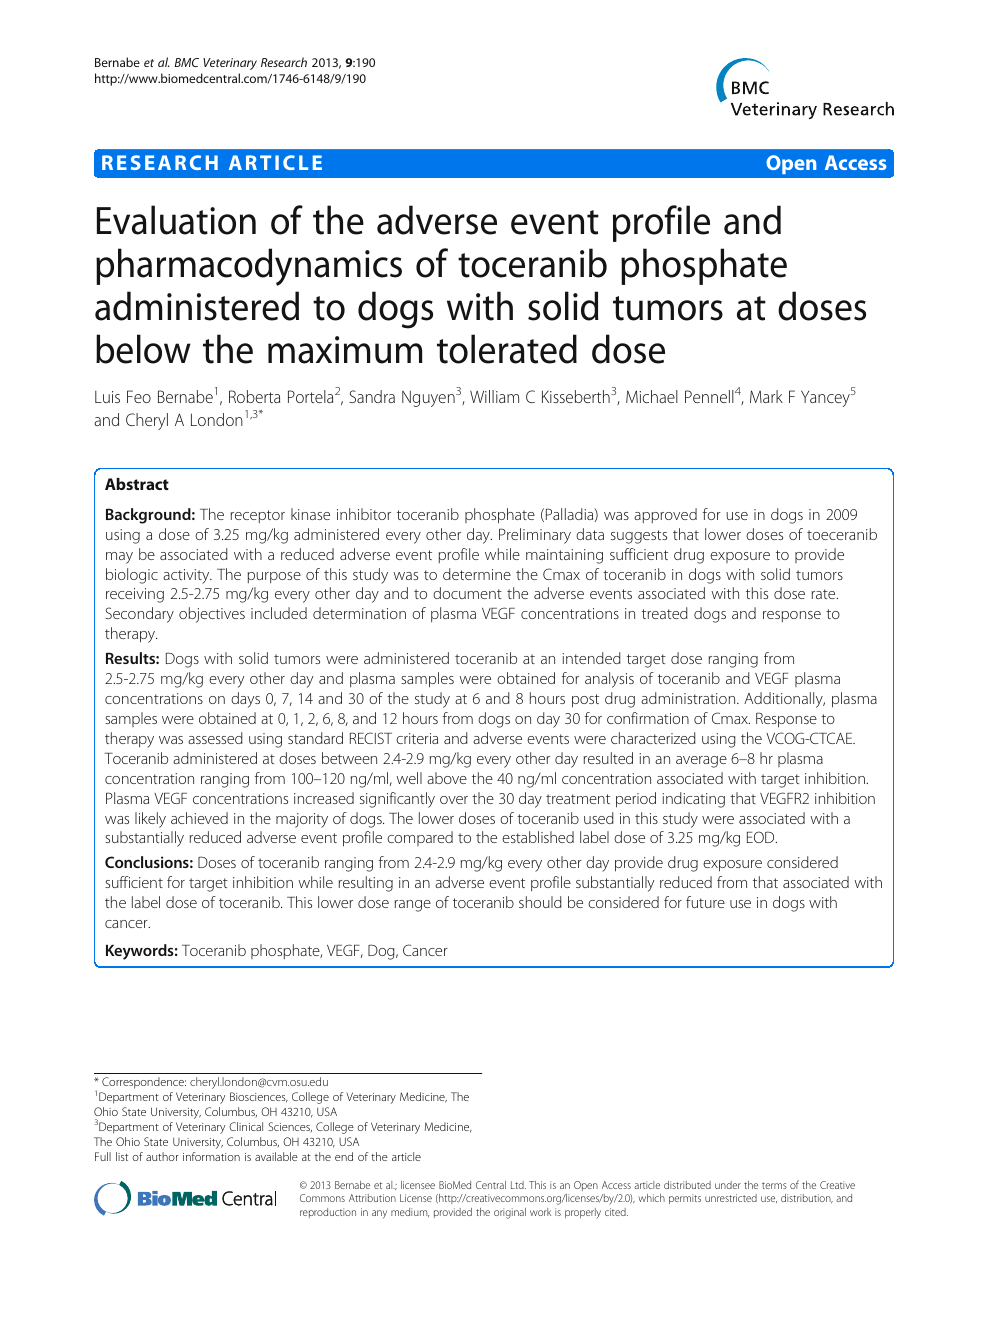 Evaluation Of The Adverse Event Profile And Pharmacodynamics Of Toceranib Phosphate Administered To Dogs With Solid Tumors At Doses Below The Maximum Tolerated Dose Topic Of Research Paper In Veterinary Science